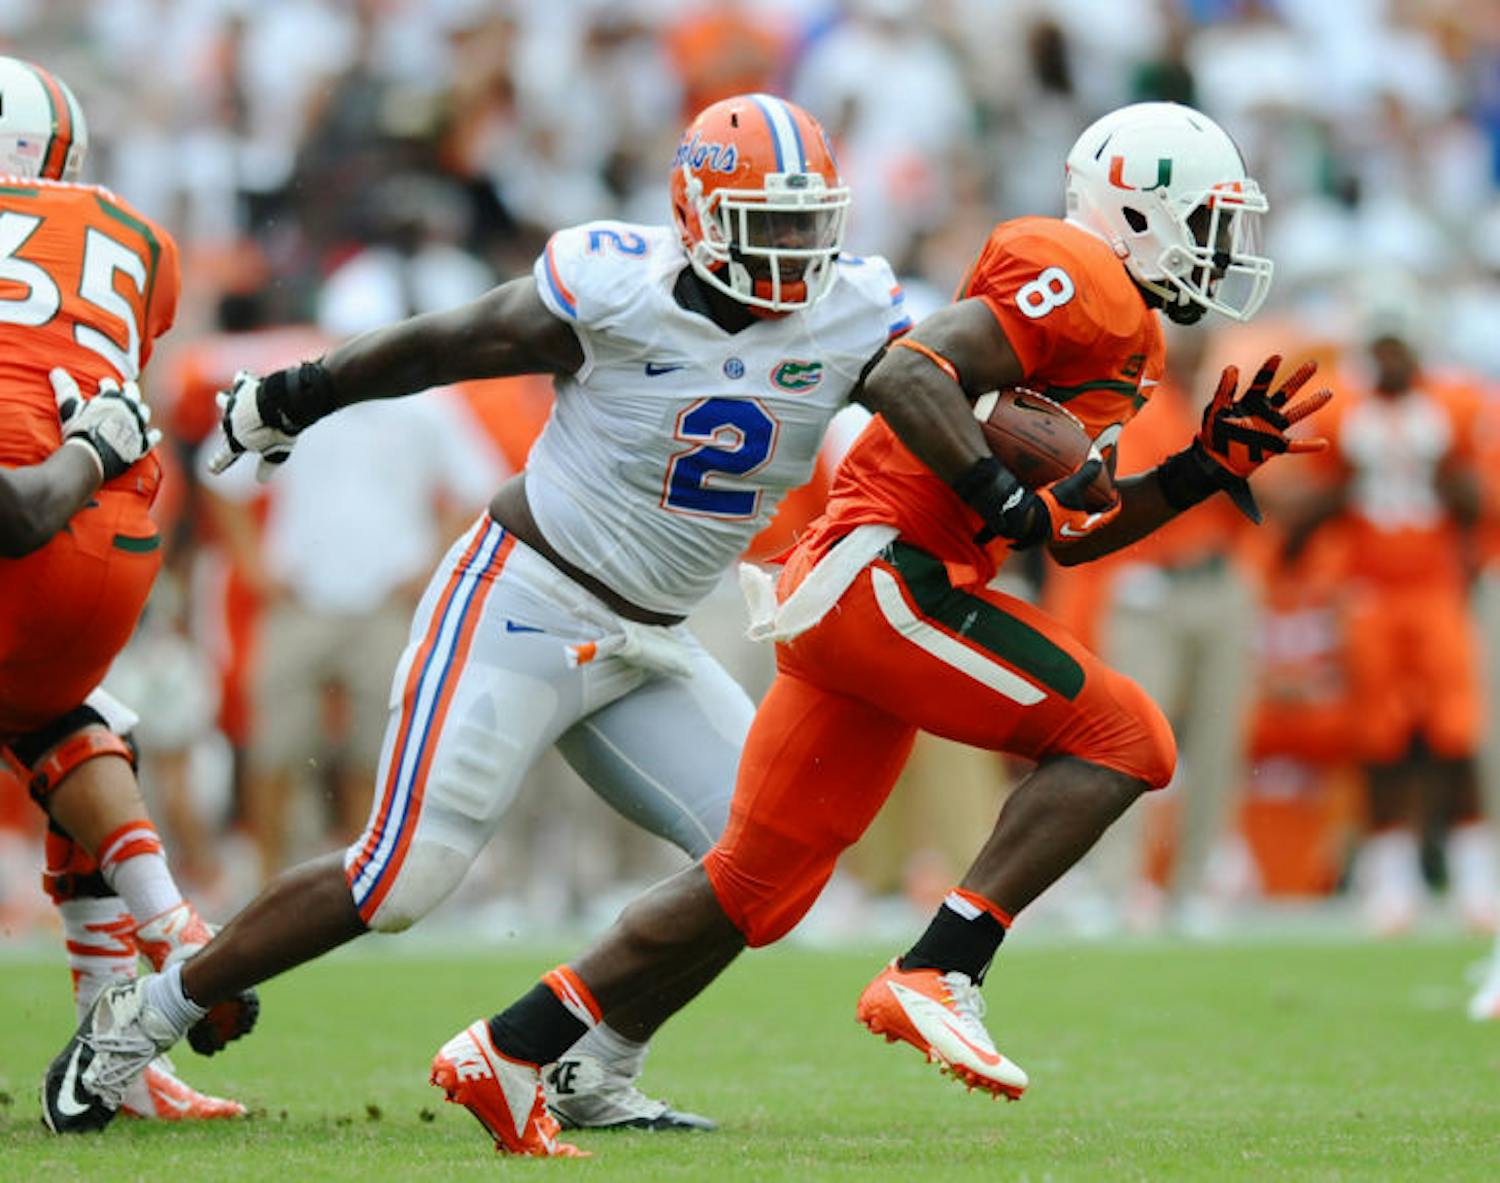 Florida senior defensive tackle Dominique Easley (2) chases Miami running back Duke Johnson (8) during the Gators’ 21-16 loss to the Hurricanes on Sept. 7 in Sun Life Stadium. UF is No. 3 in the nation in total defense, allowing 208.5 yards per game this season.